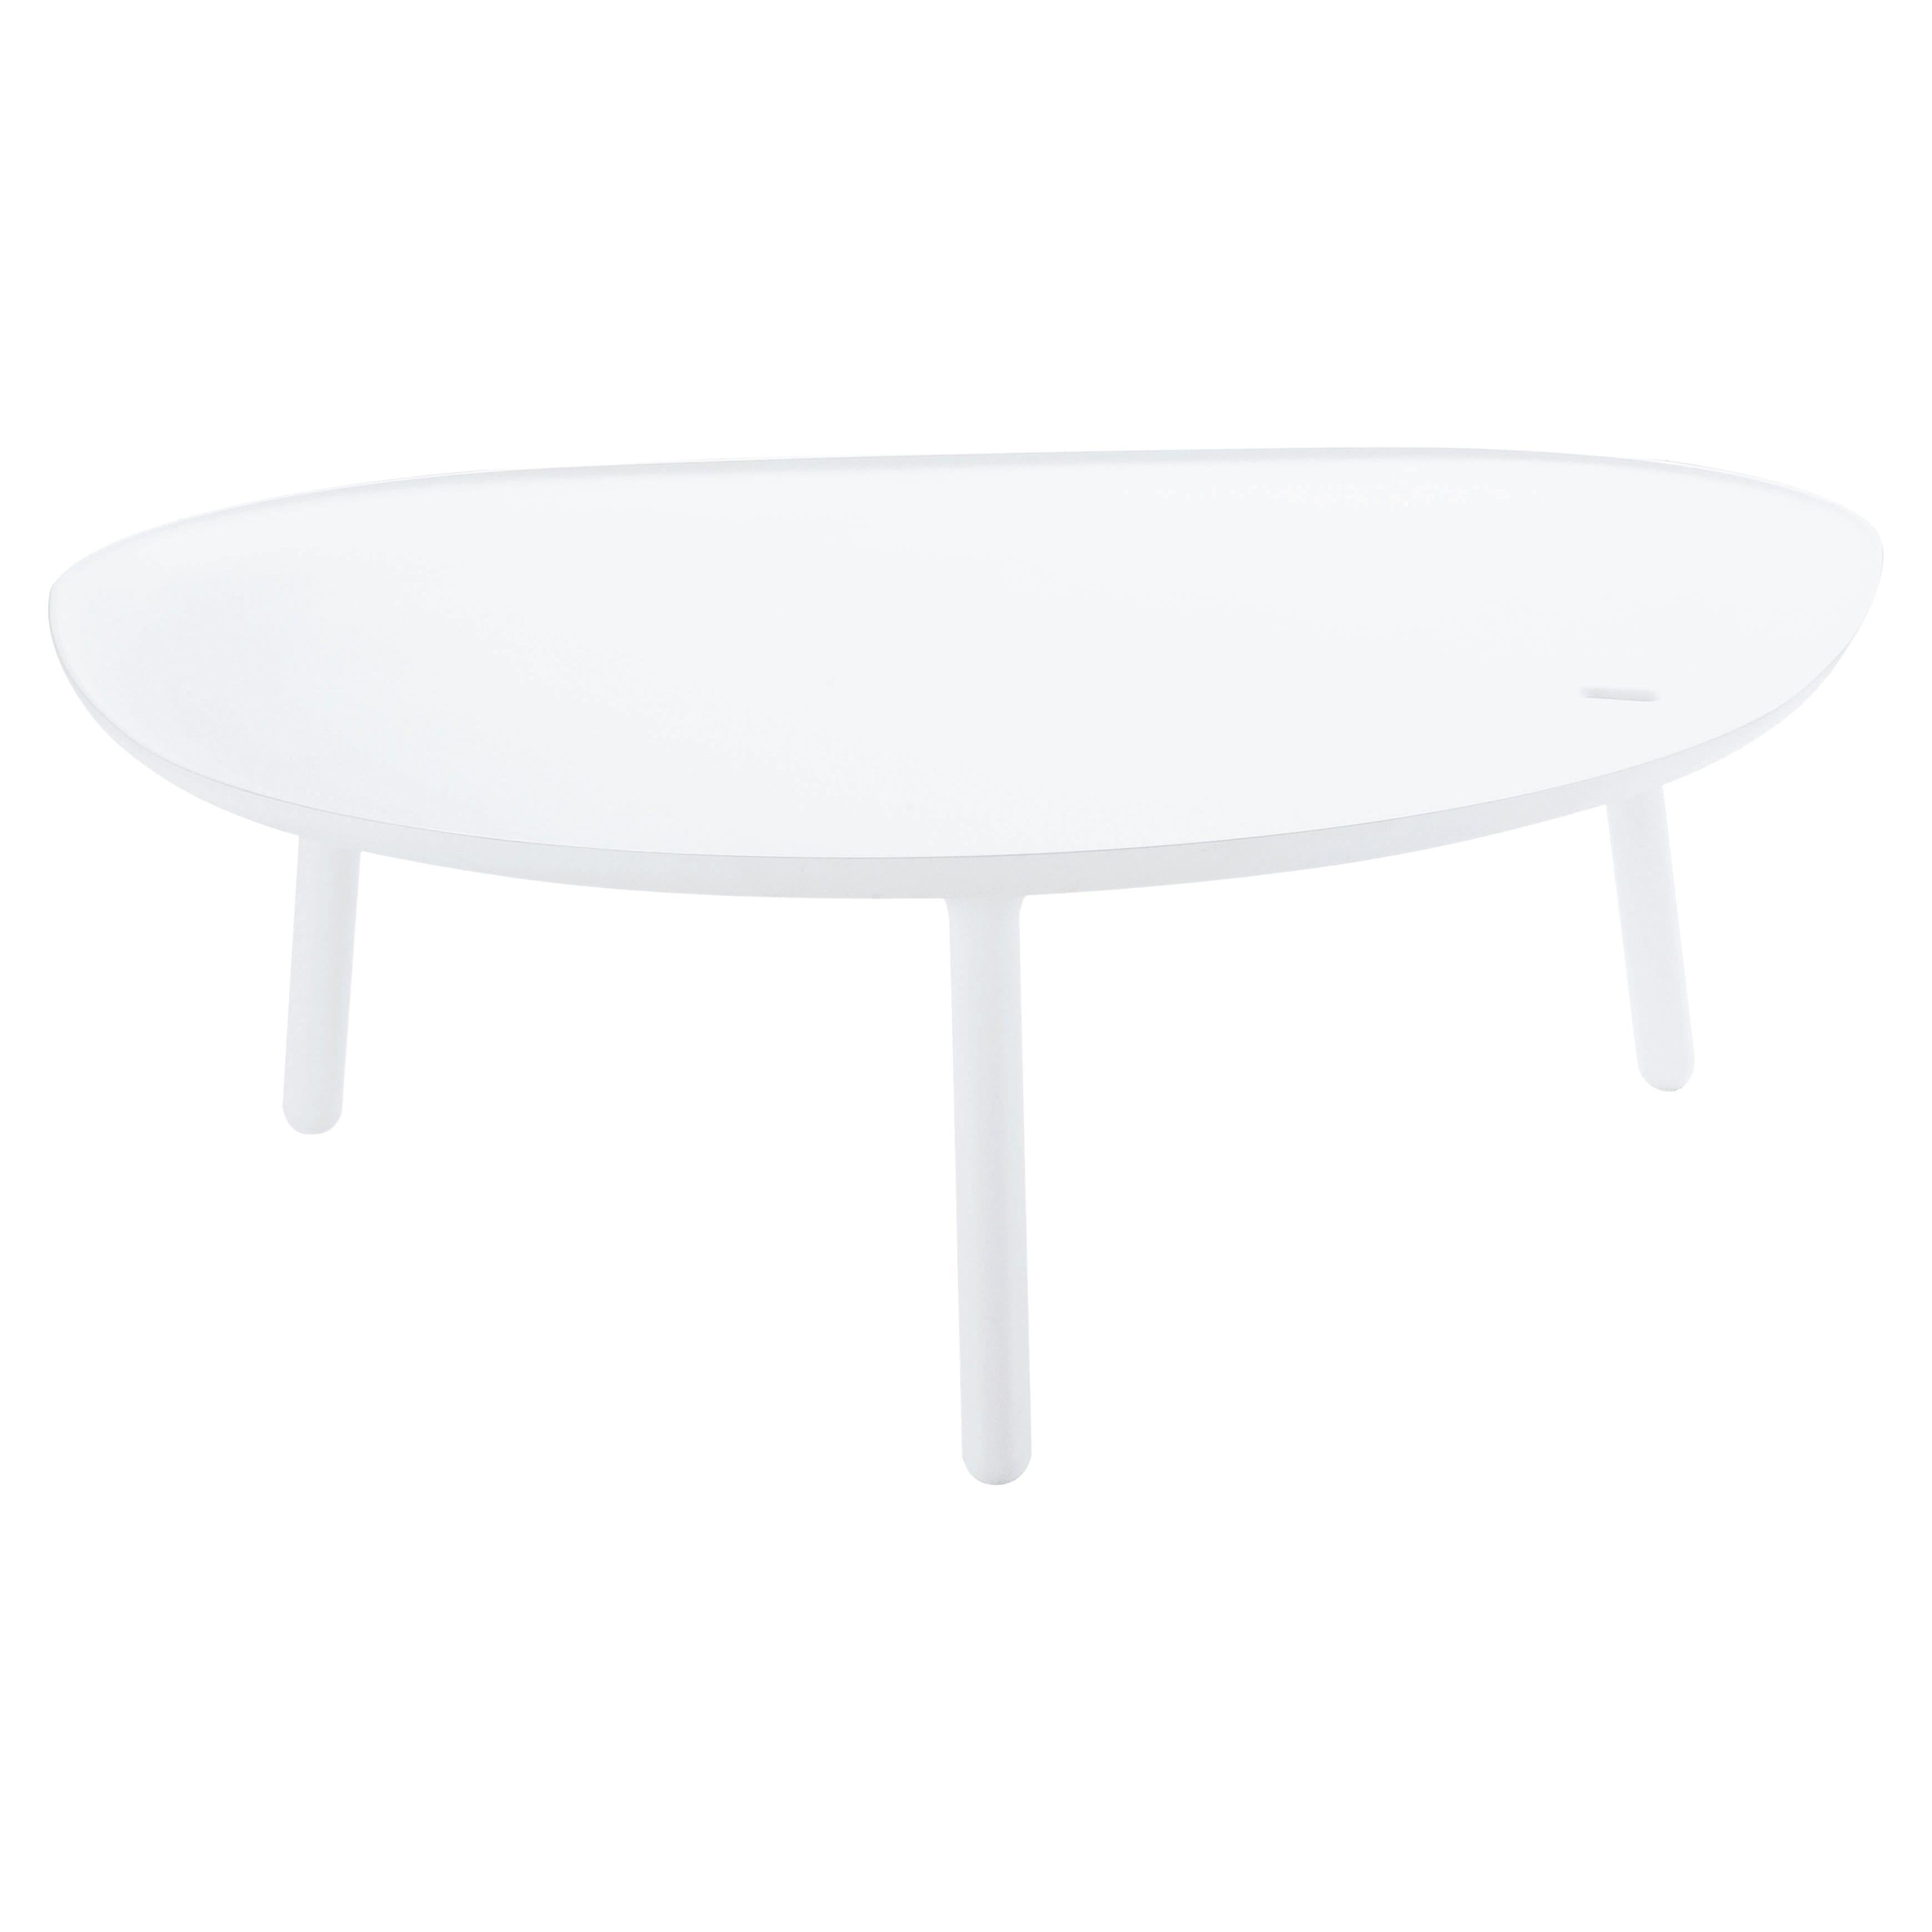 Zanotta Ninfea Small Table in White Acrylic Resin by Ludovica+Roberto Palomba For Sale